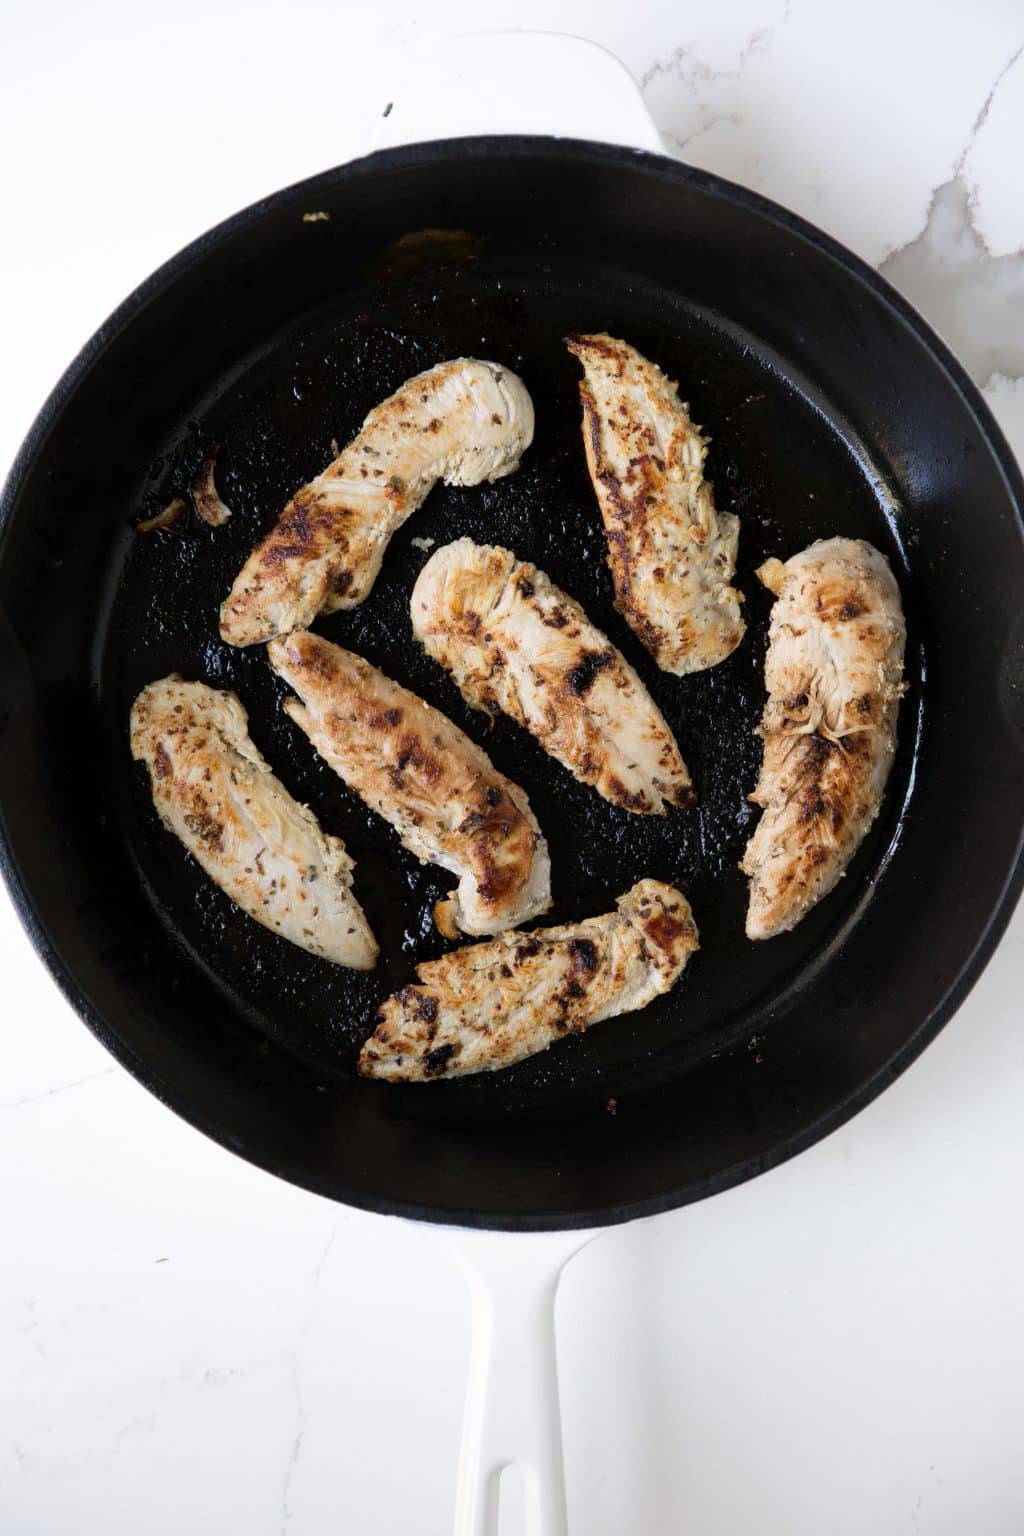 Fully cooked yogurt marinated chicken in a cast iron skillet